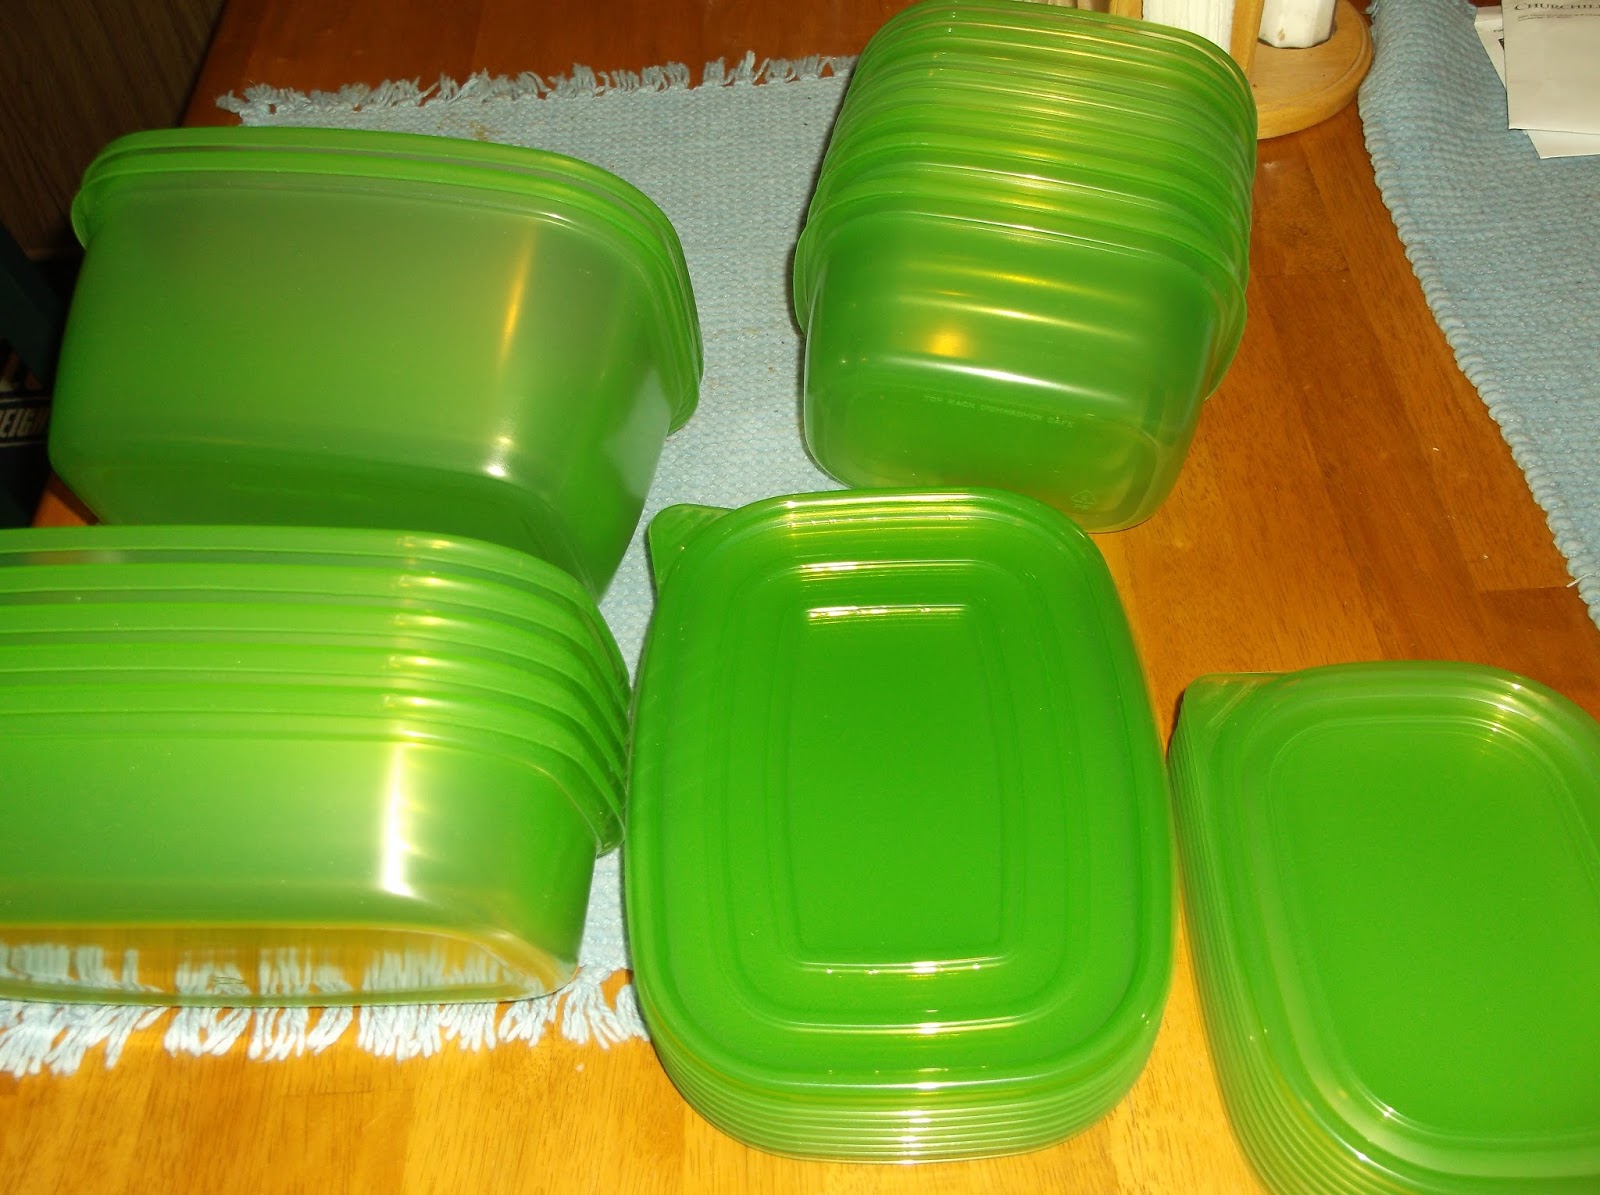 Debbie Meyer GreenBoxes & GreenBags Combo Set, Food Storage Containers with  Lids & Bags, Keep Fruits